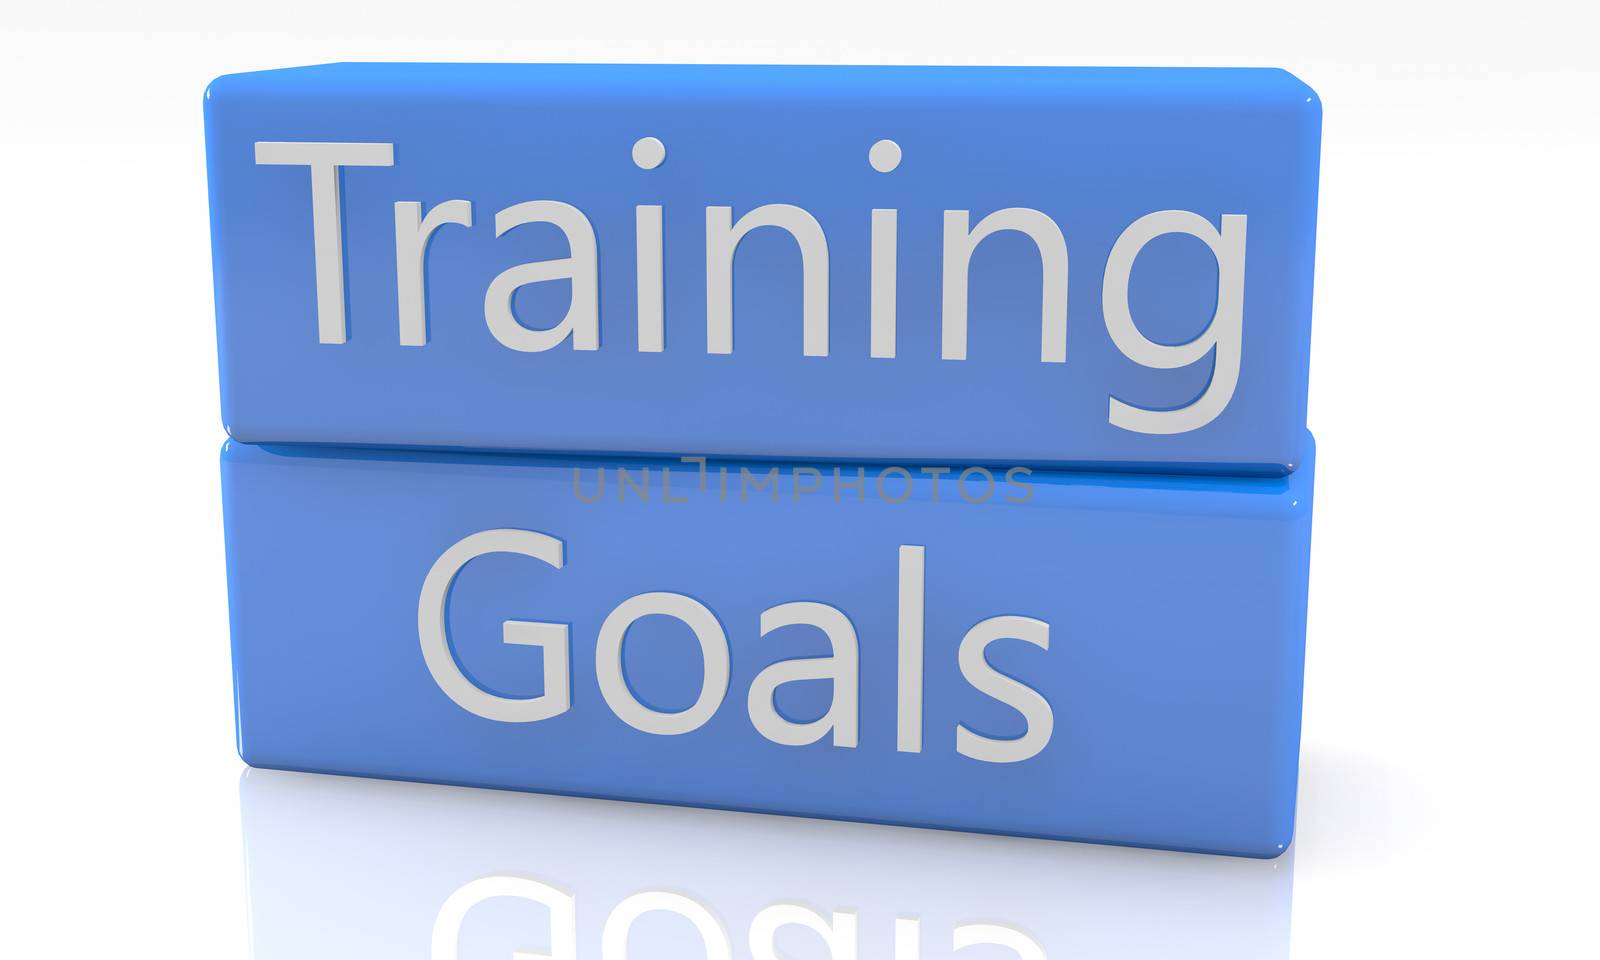 3d render blue box with Training Goals on it on white background with reflection